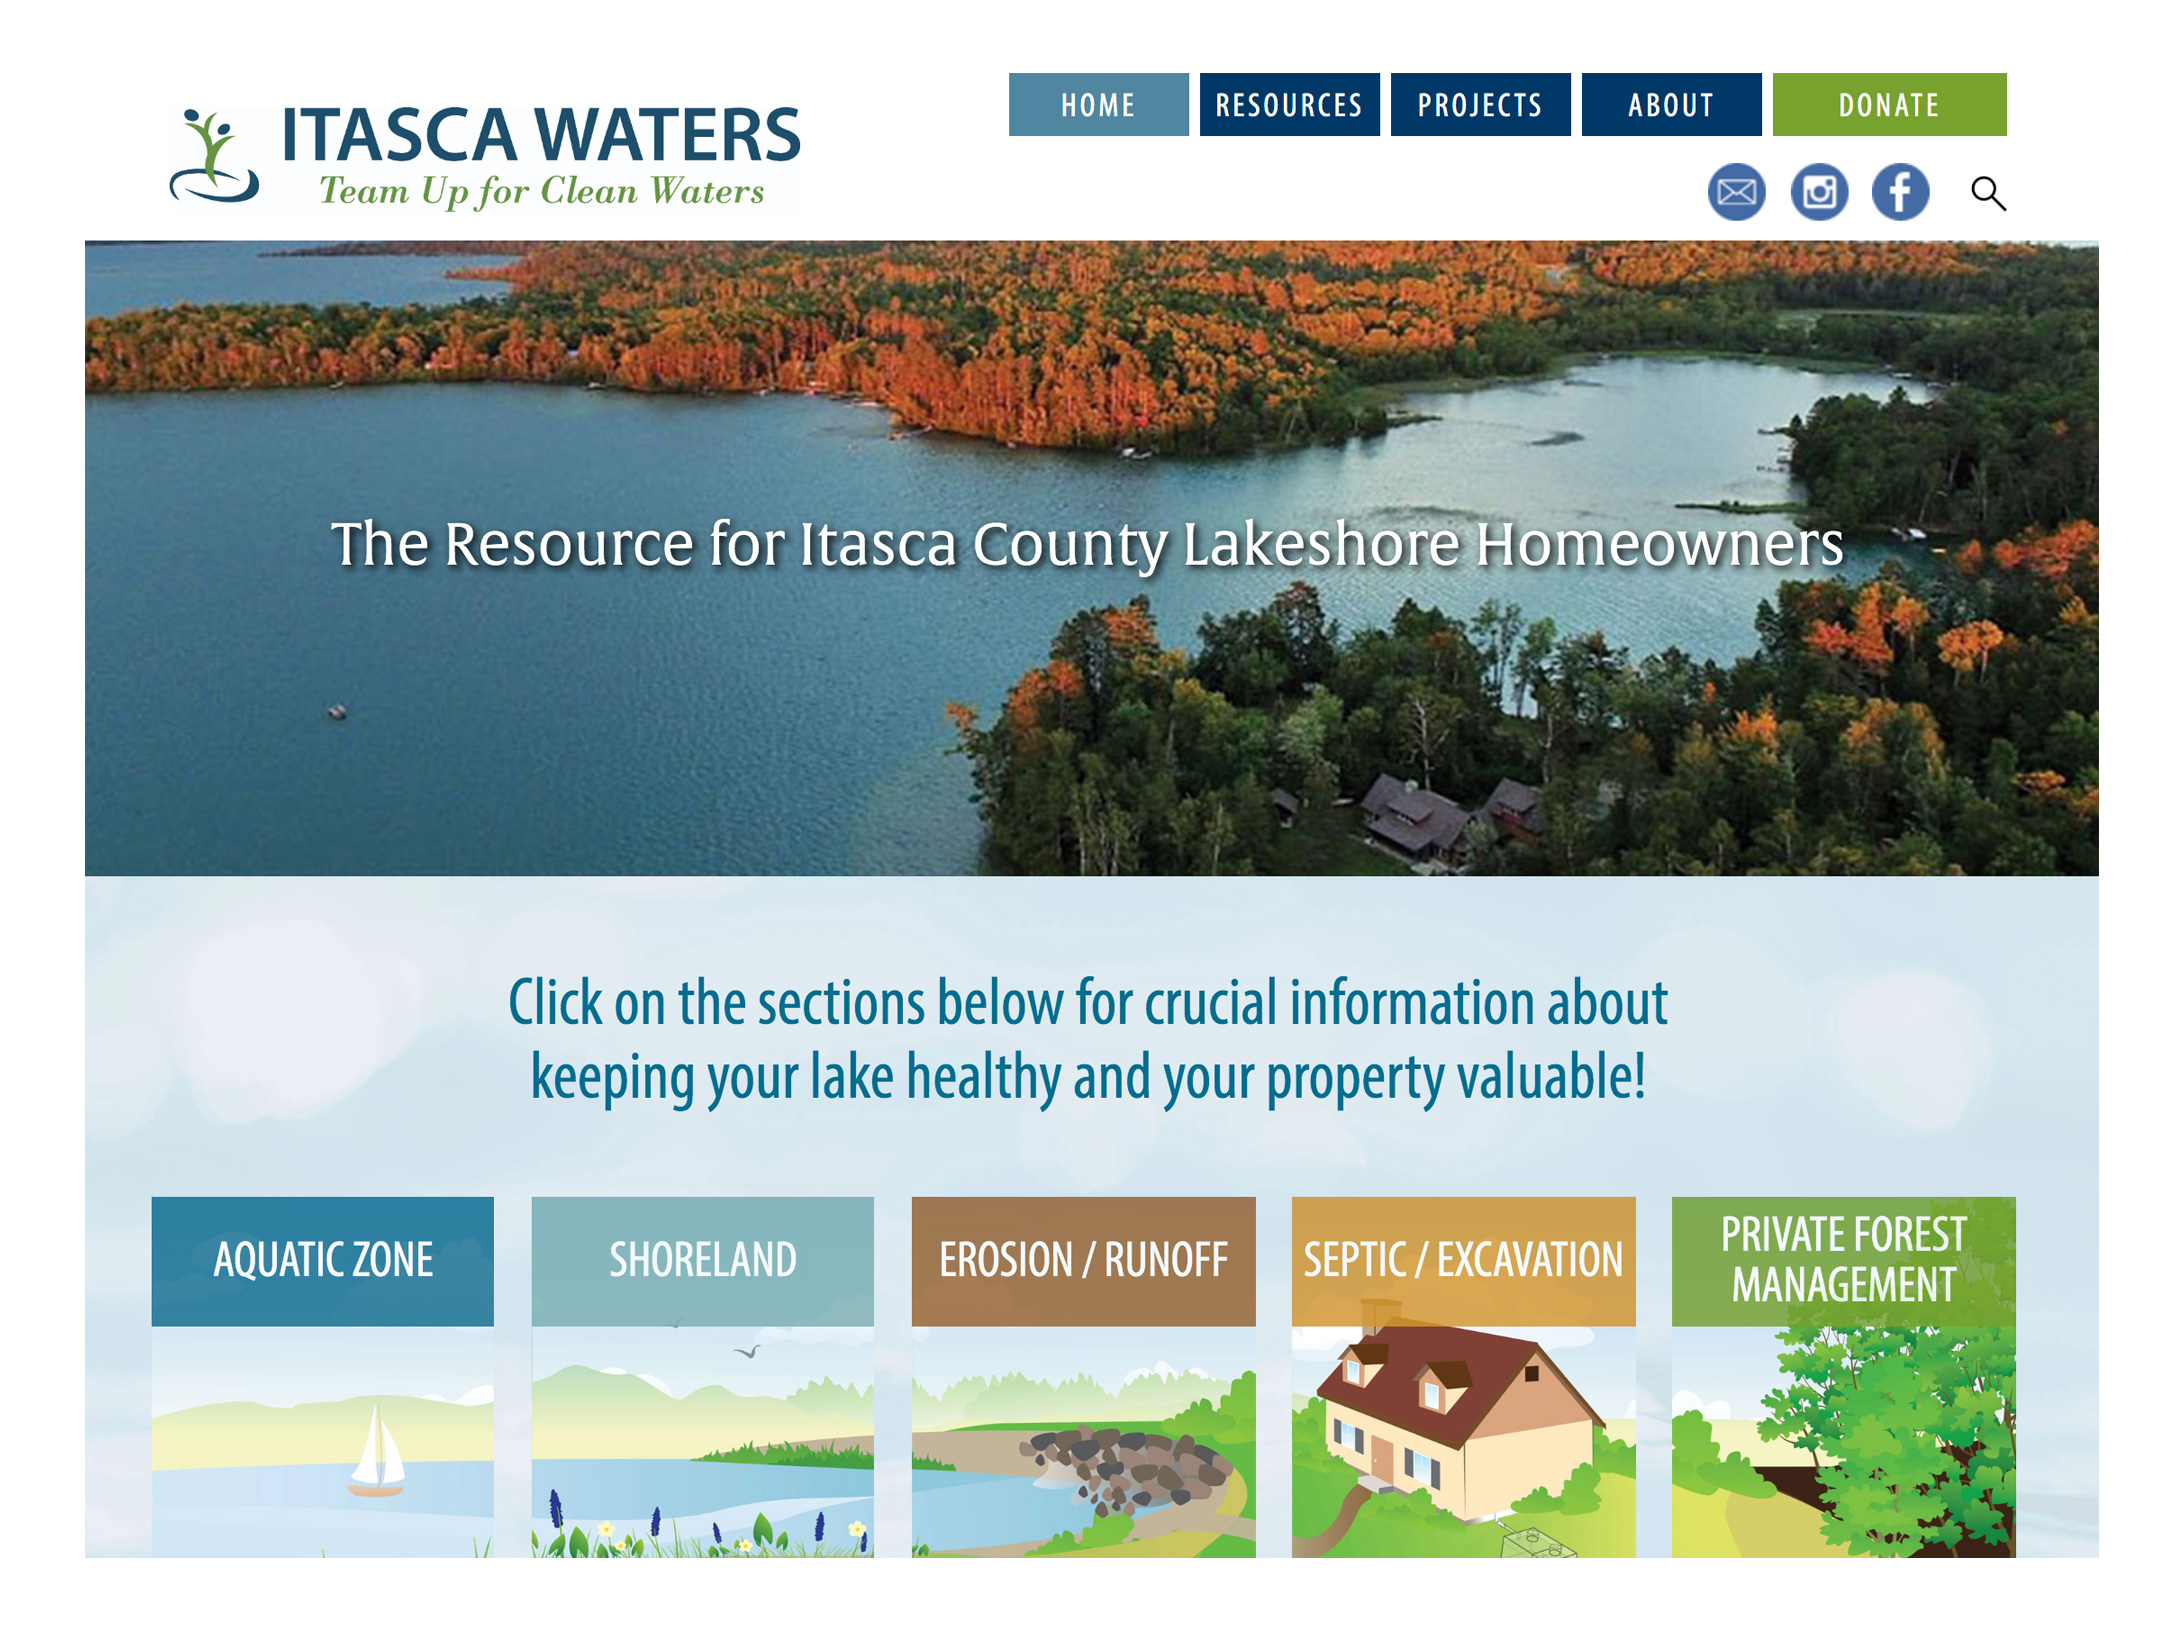   itascawaters.org  